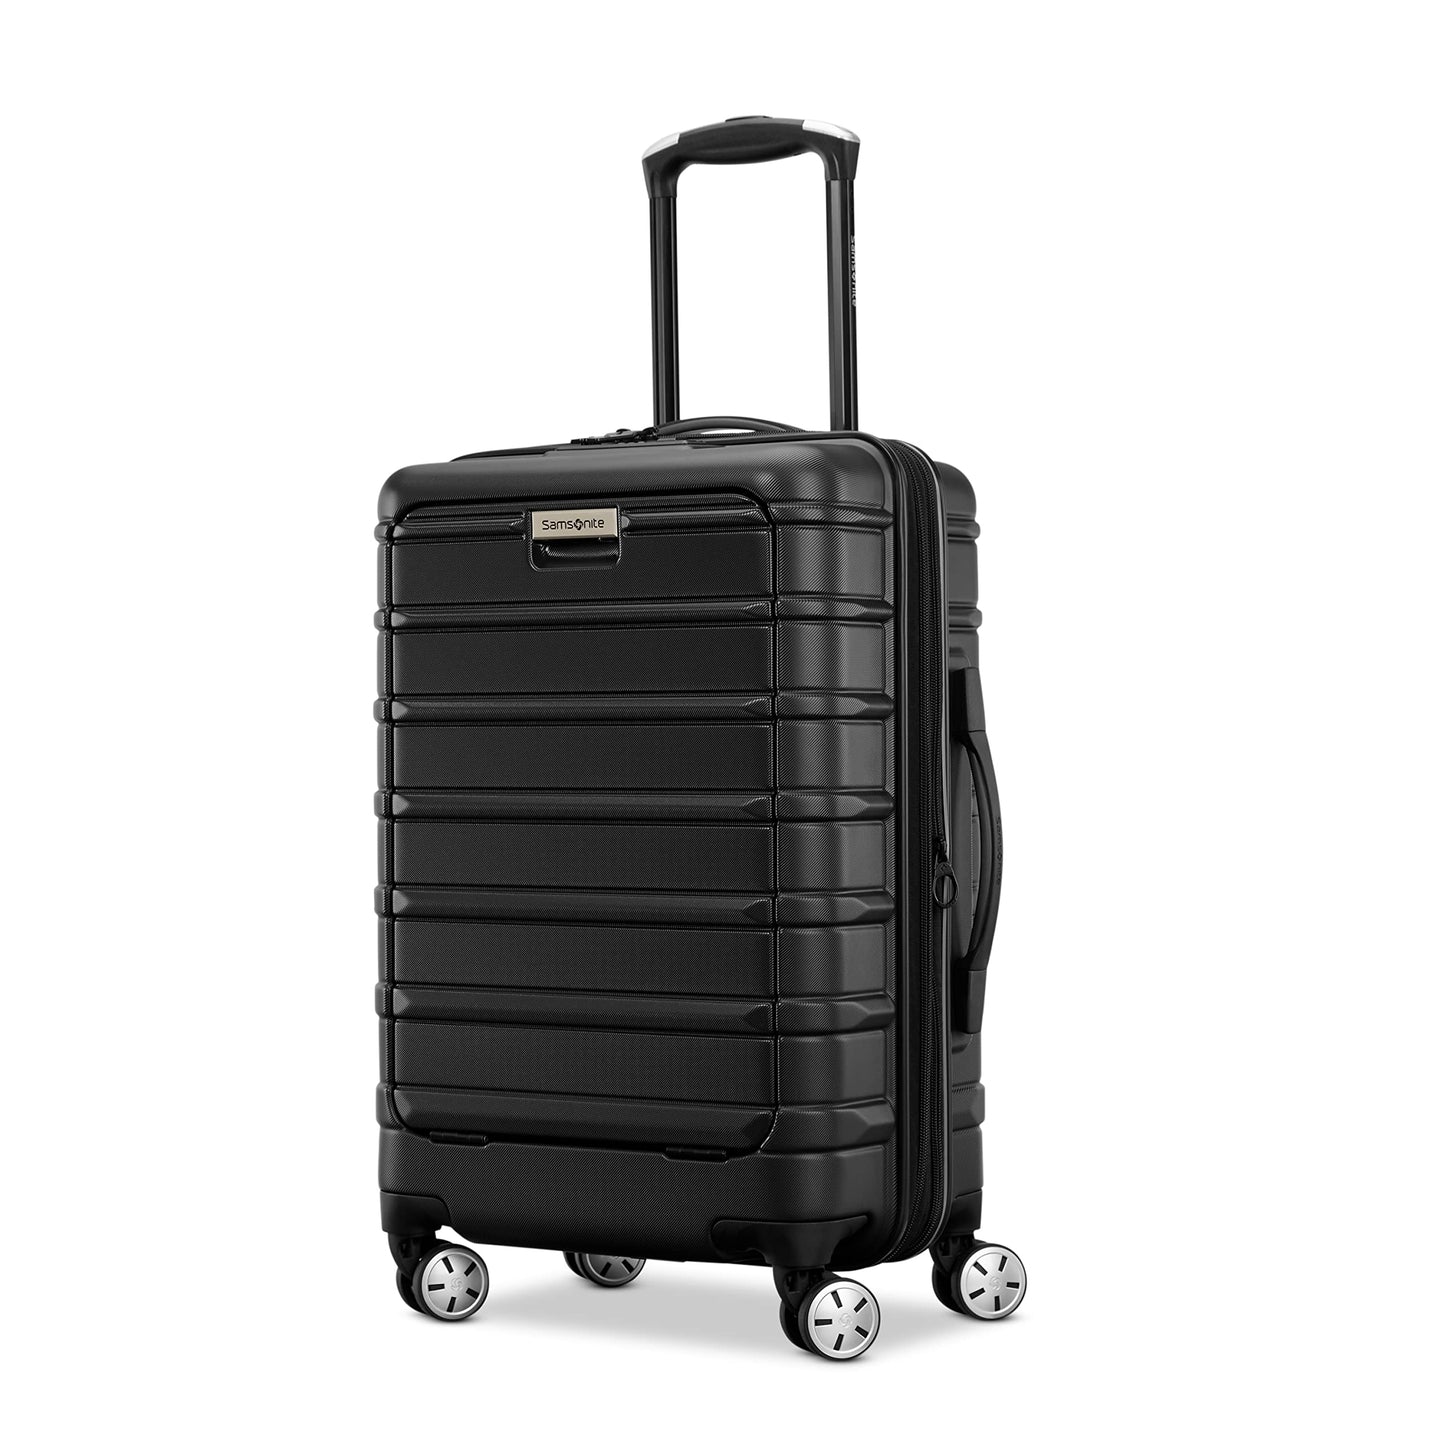 Samsonite Omni 2 PRO Hardside Expandable Luggage with Spinners | Midnight Black | Carry-on